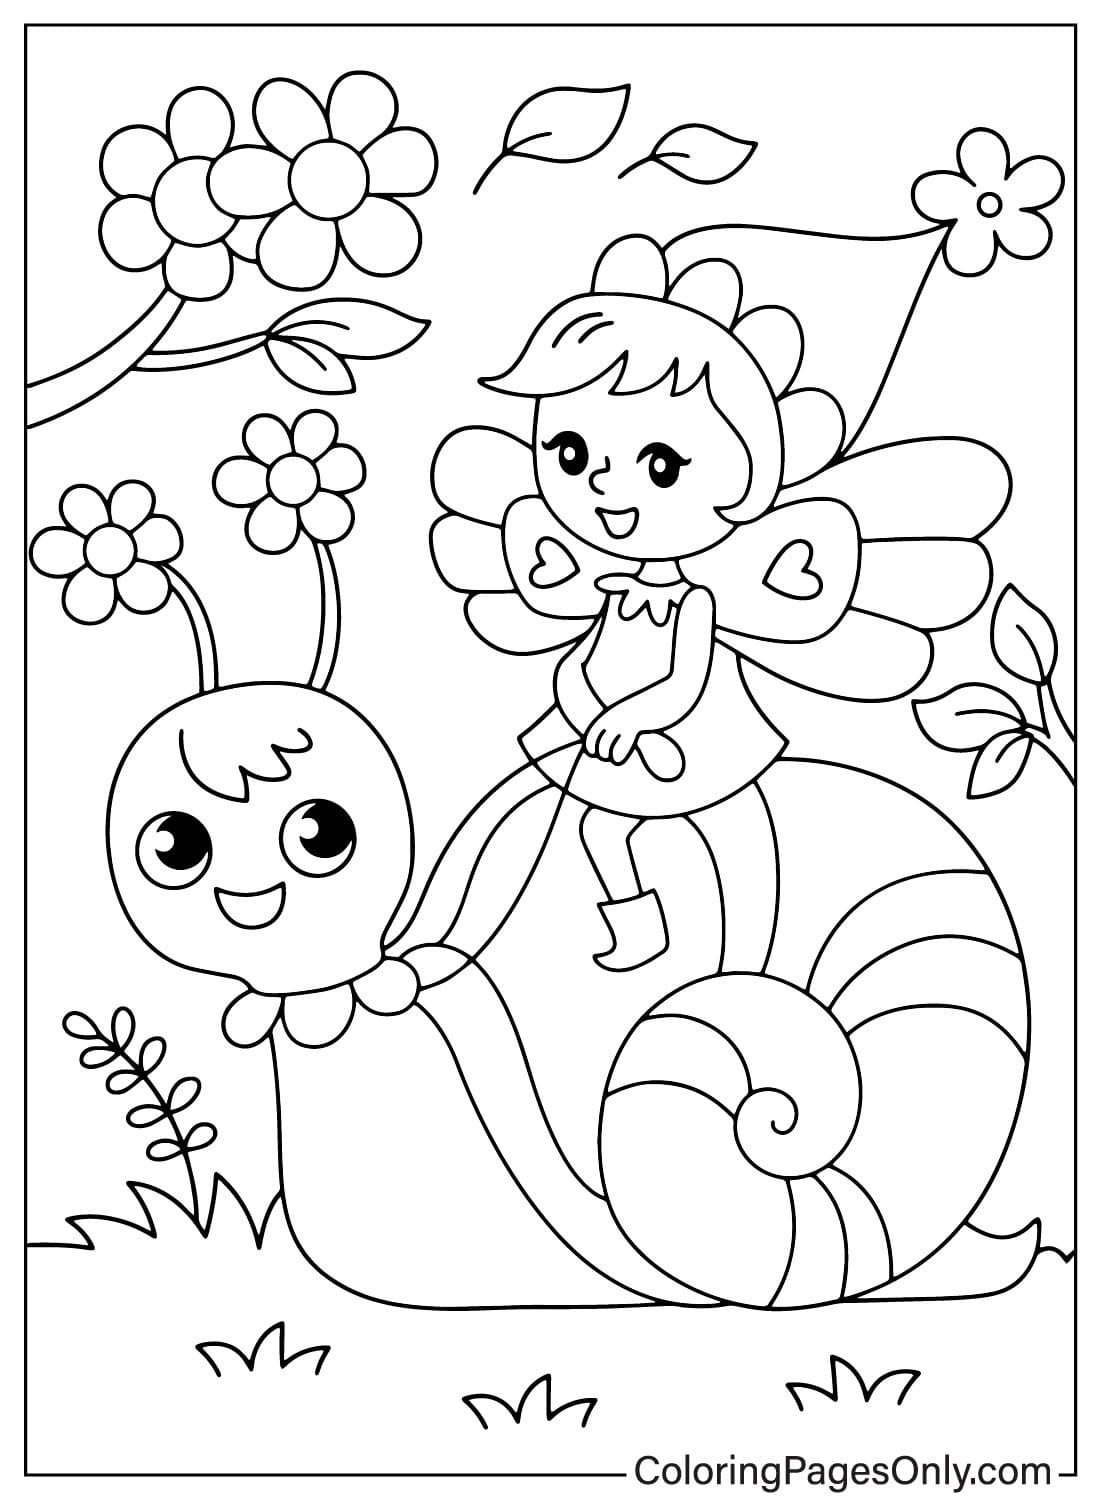 Kawaii First Day of Spring Coloring Page from First Day of Spring